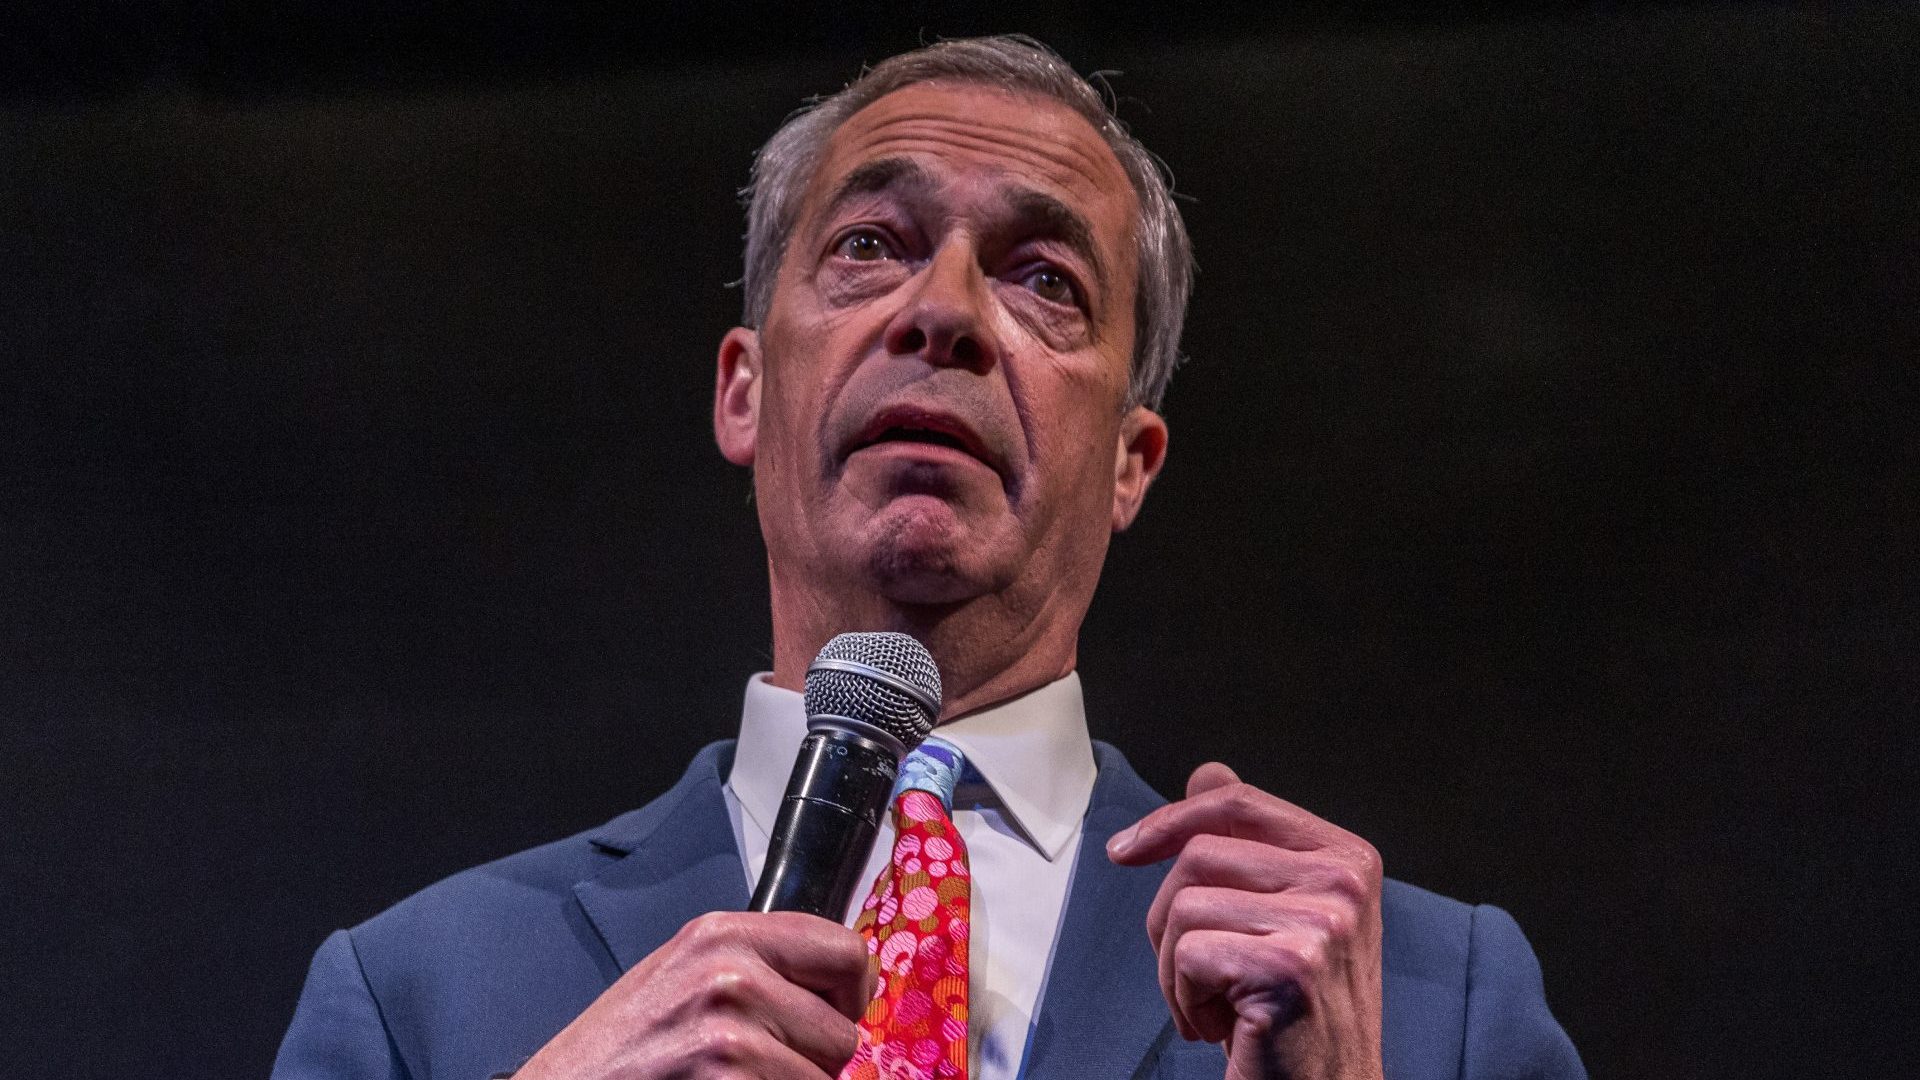 Nigel Farage gives a speech at the National Conservatism Conference in Brussels (Photo by Omar Havana/Getty Images)